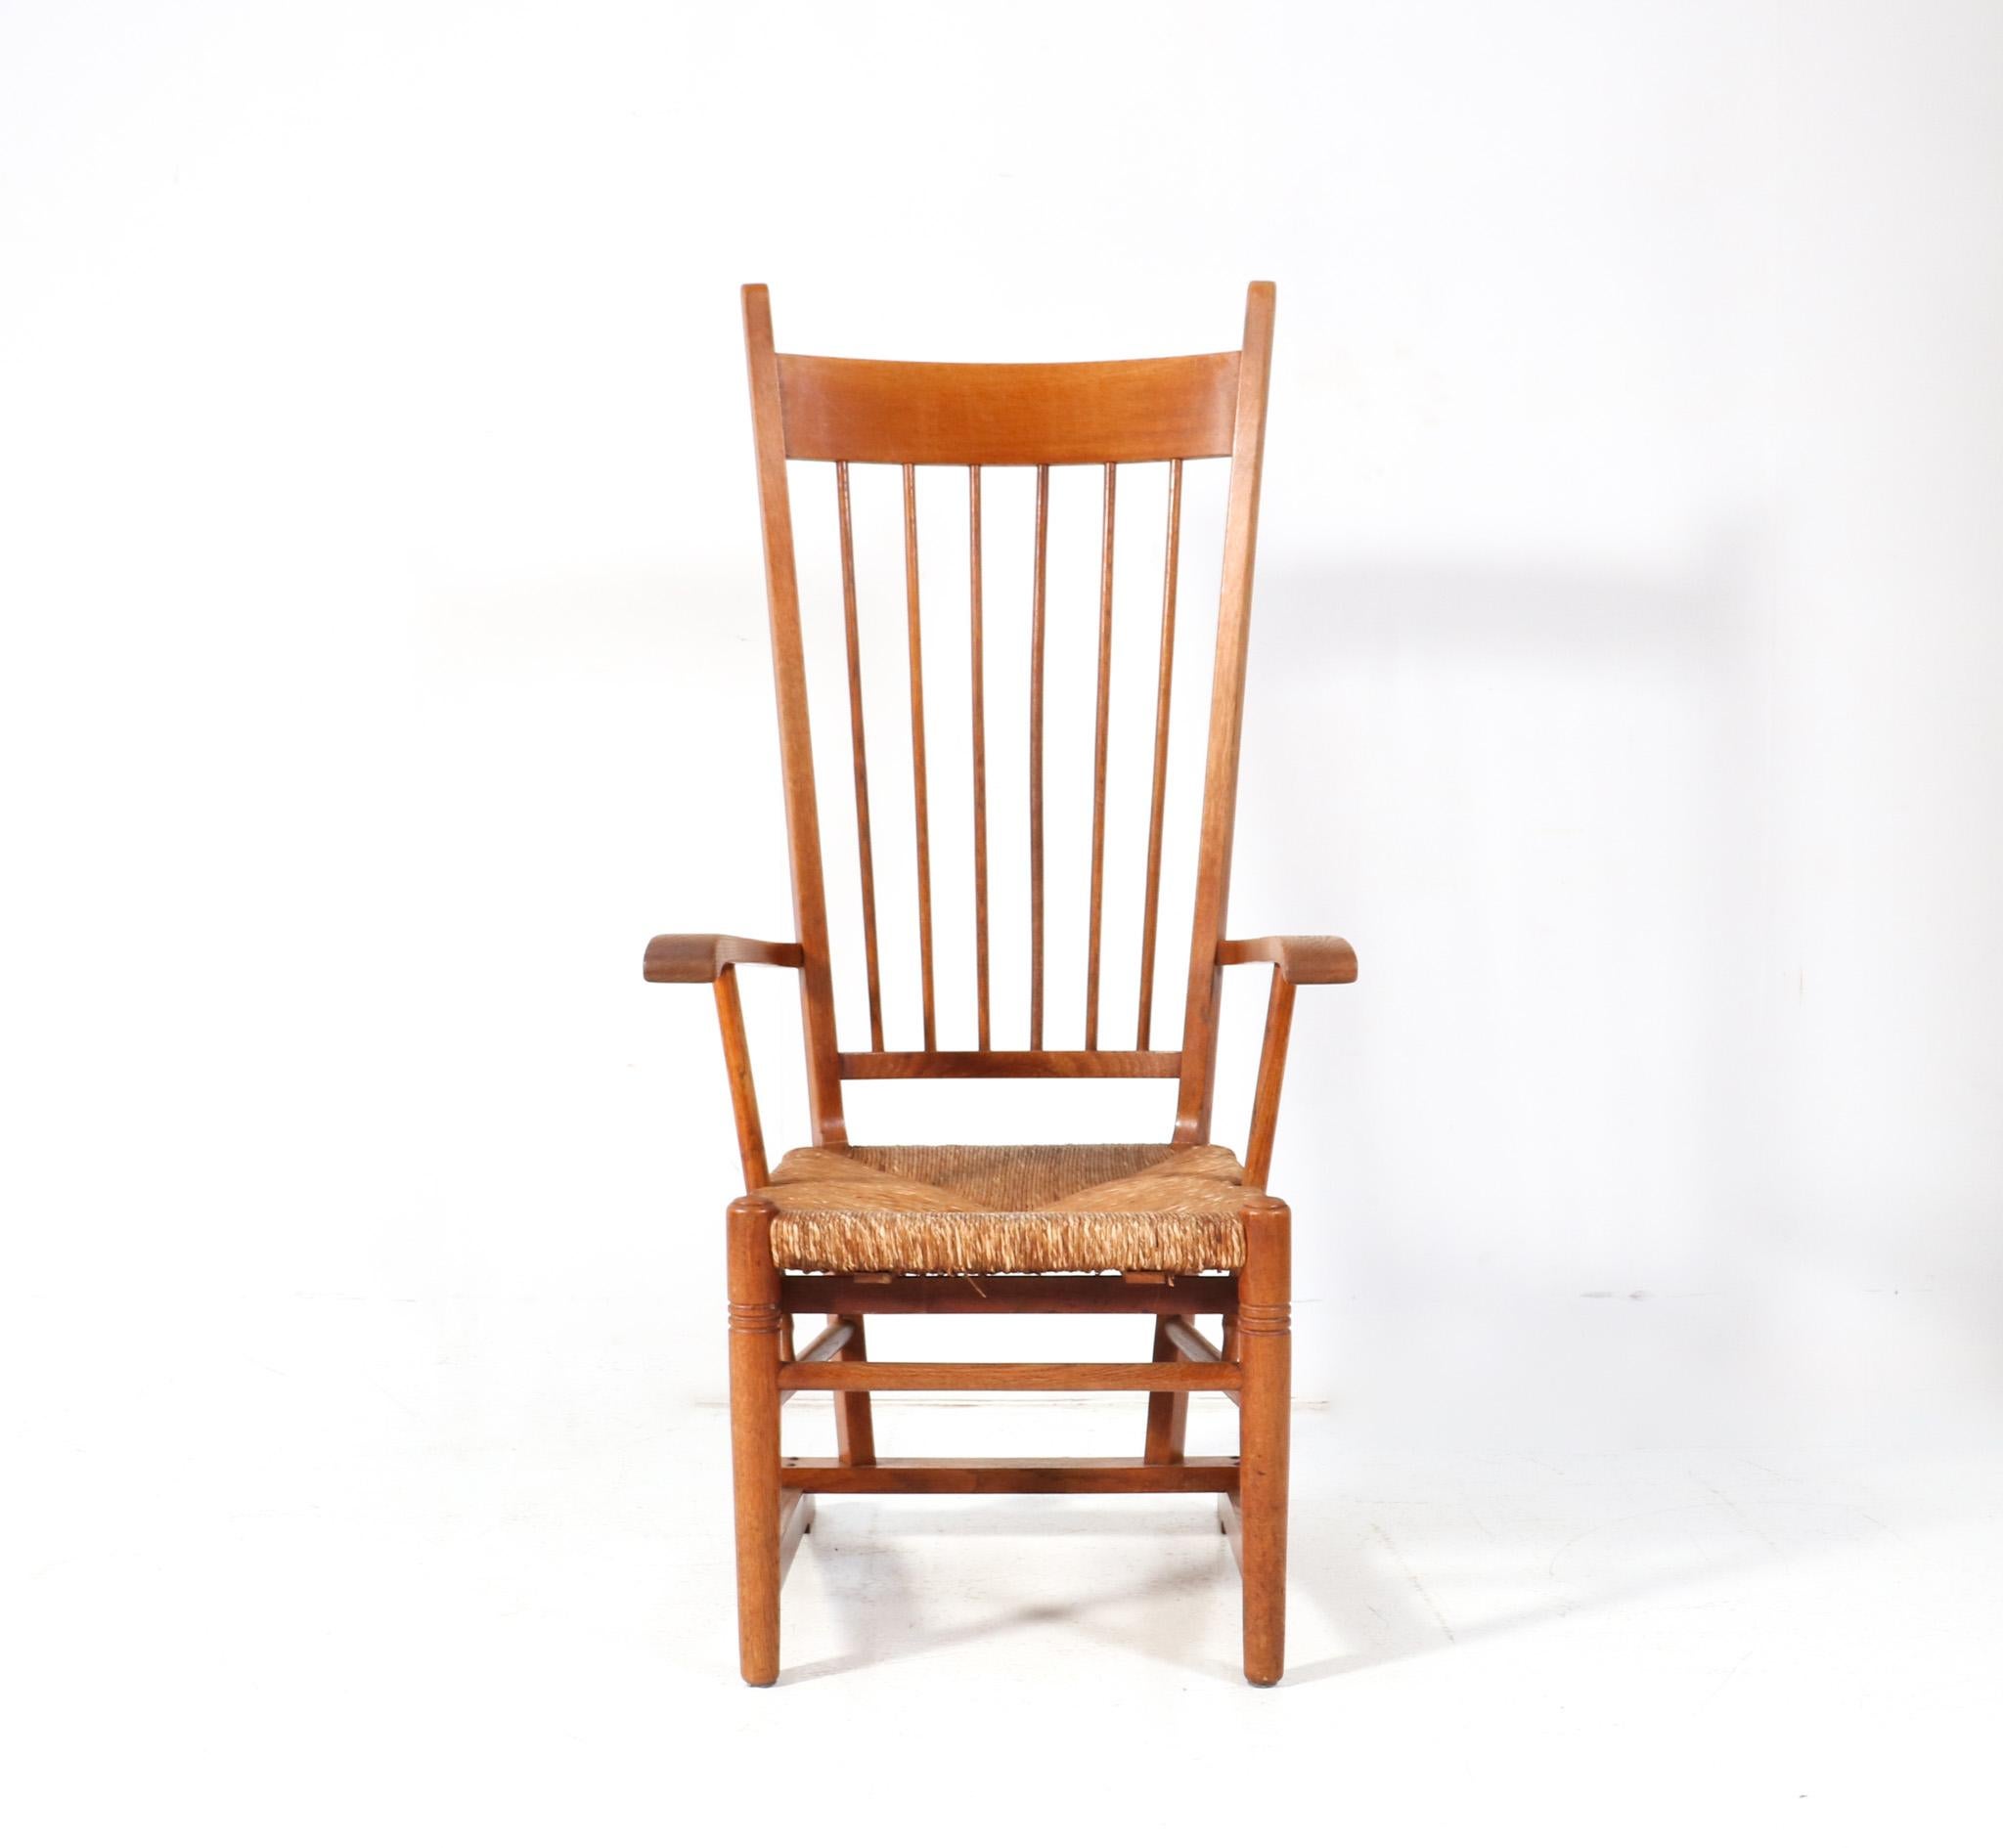 Stunning and rare Arts & Crafts Art Nouveau high back armchair.
Striking Dutch design from the 1900s.
Solid oak frame with original rush seat.
Well designed tall back and elegant and sleek rear legs.
This wonderful Arts & Crafts Art Nouveau high